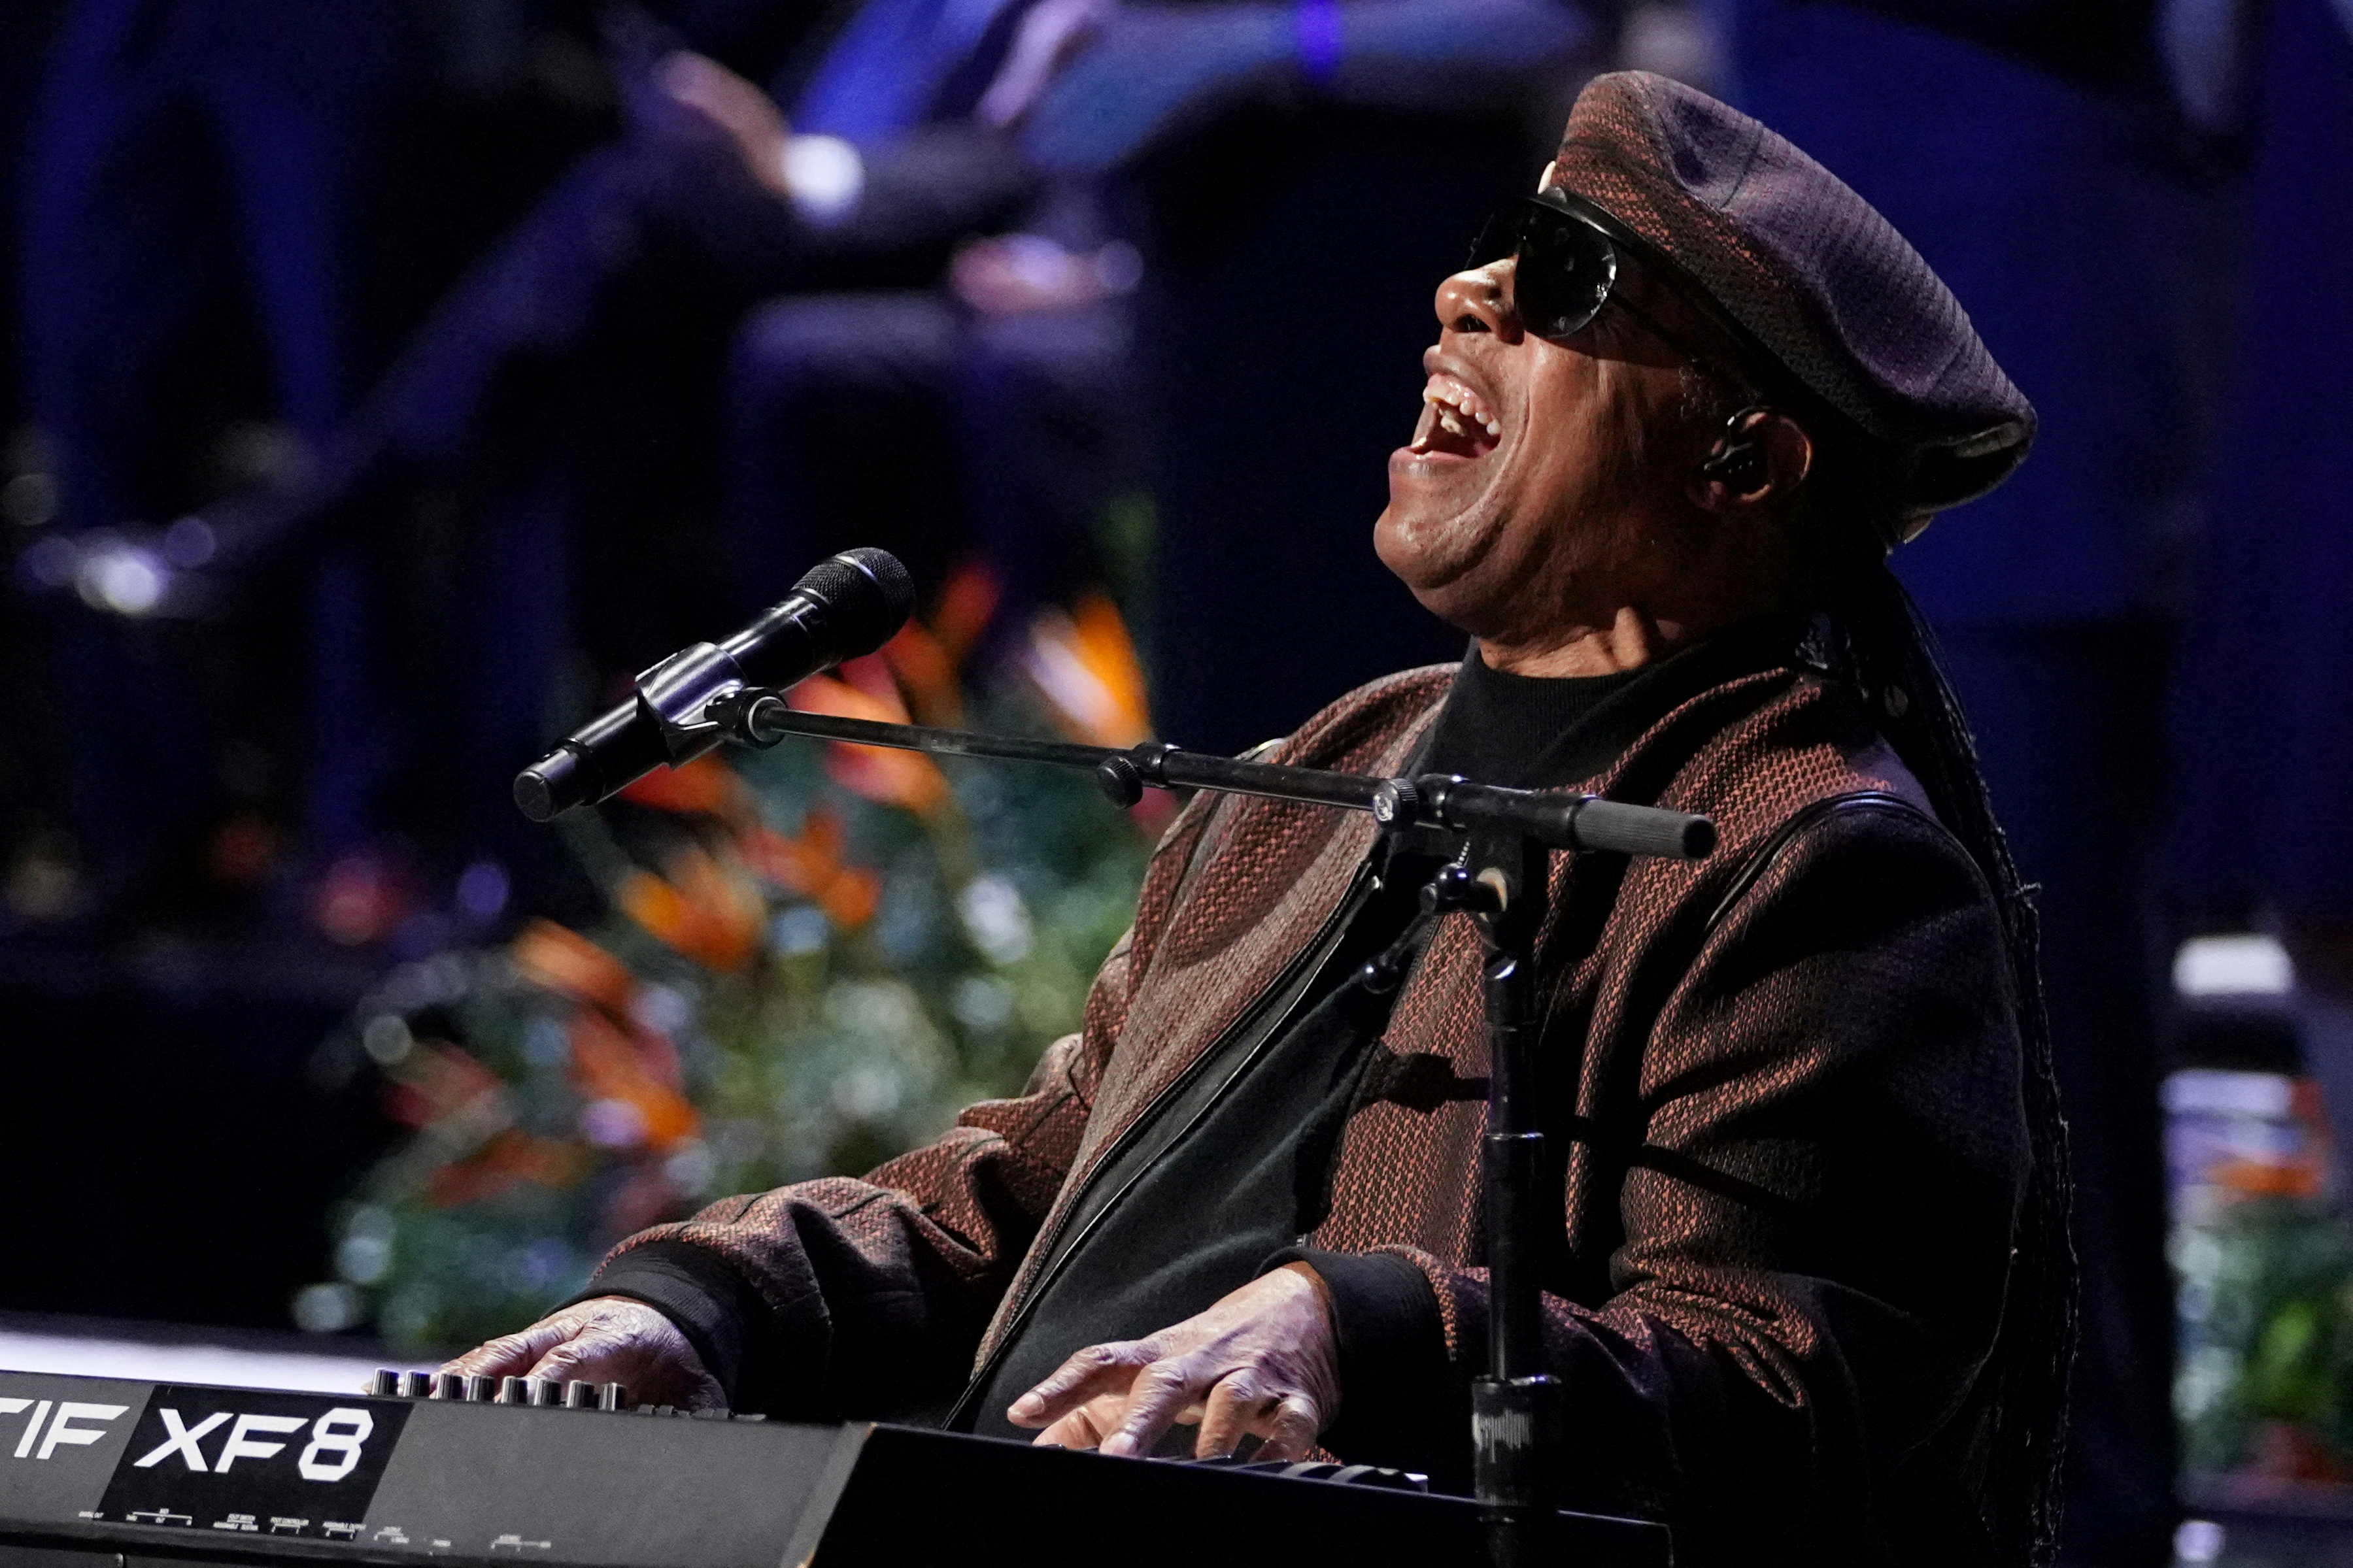 Premios Grammy 2023: Stevie Wonder cantó “The way You do the Things you Do”